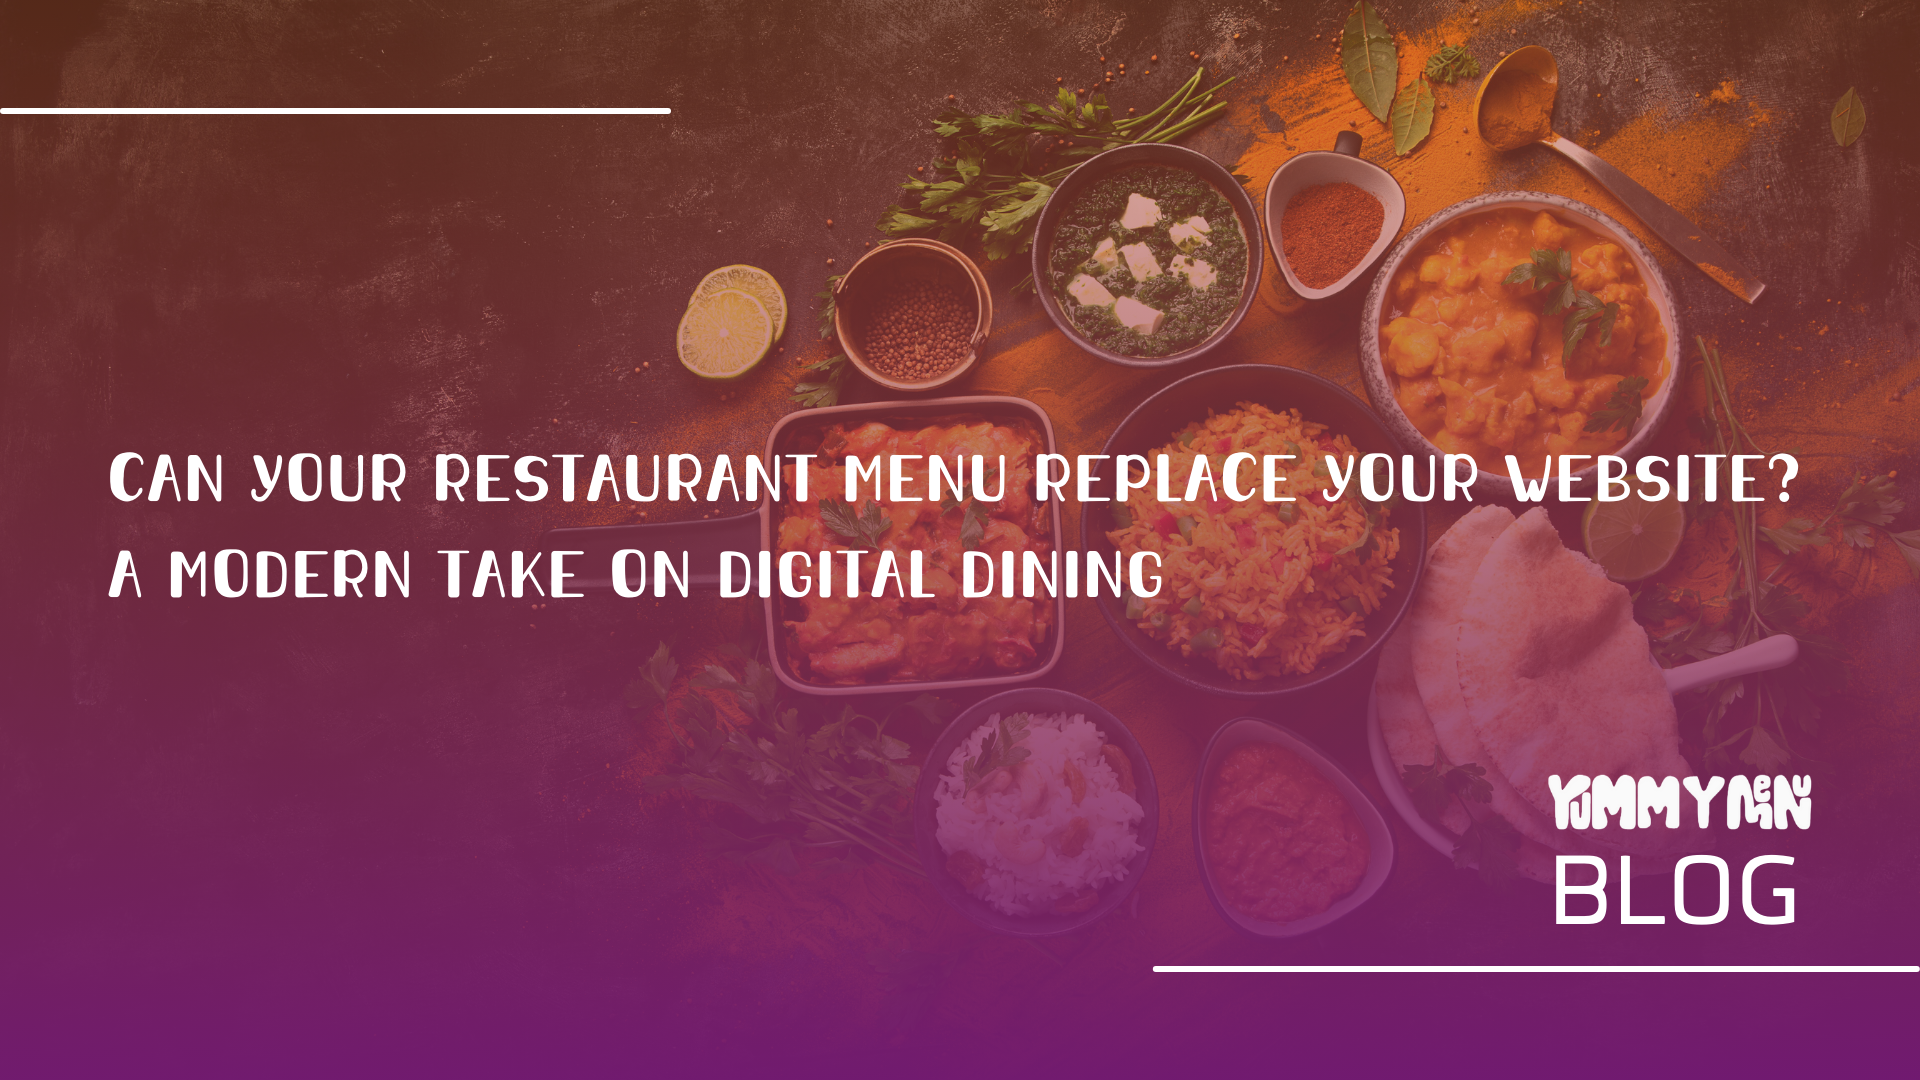 Can Your Restaurant Menu Replace Your Website? A Modern Take on Digital Dining